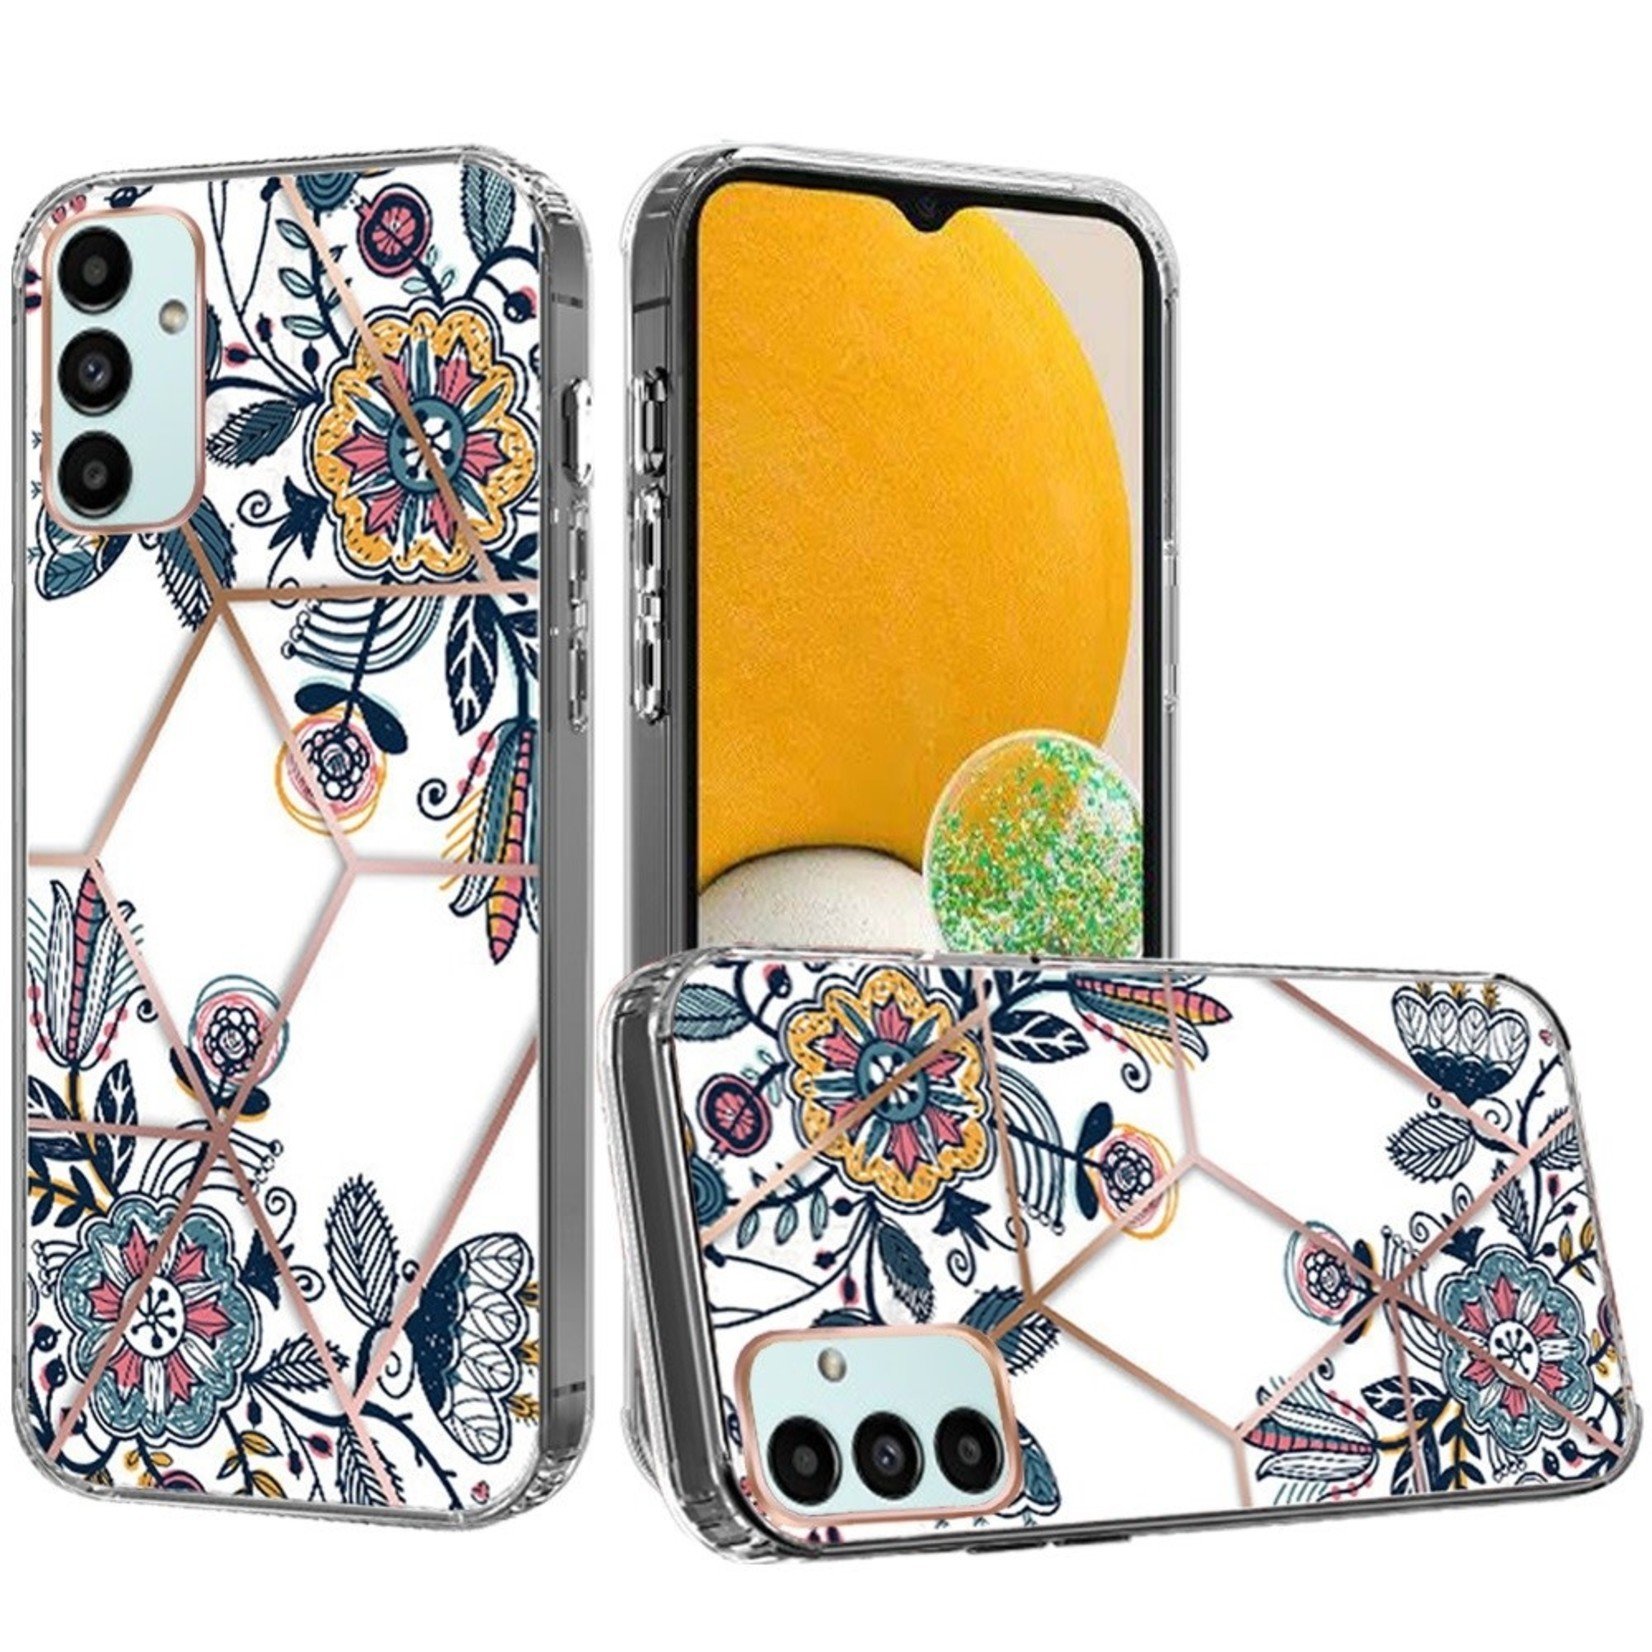 Samsung ART IMD Chrome Beautiful Design ShockProof Case Cover - Floral F For Samsung Galaxy A13 5G